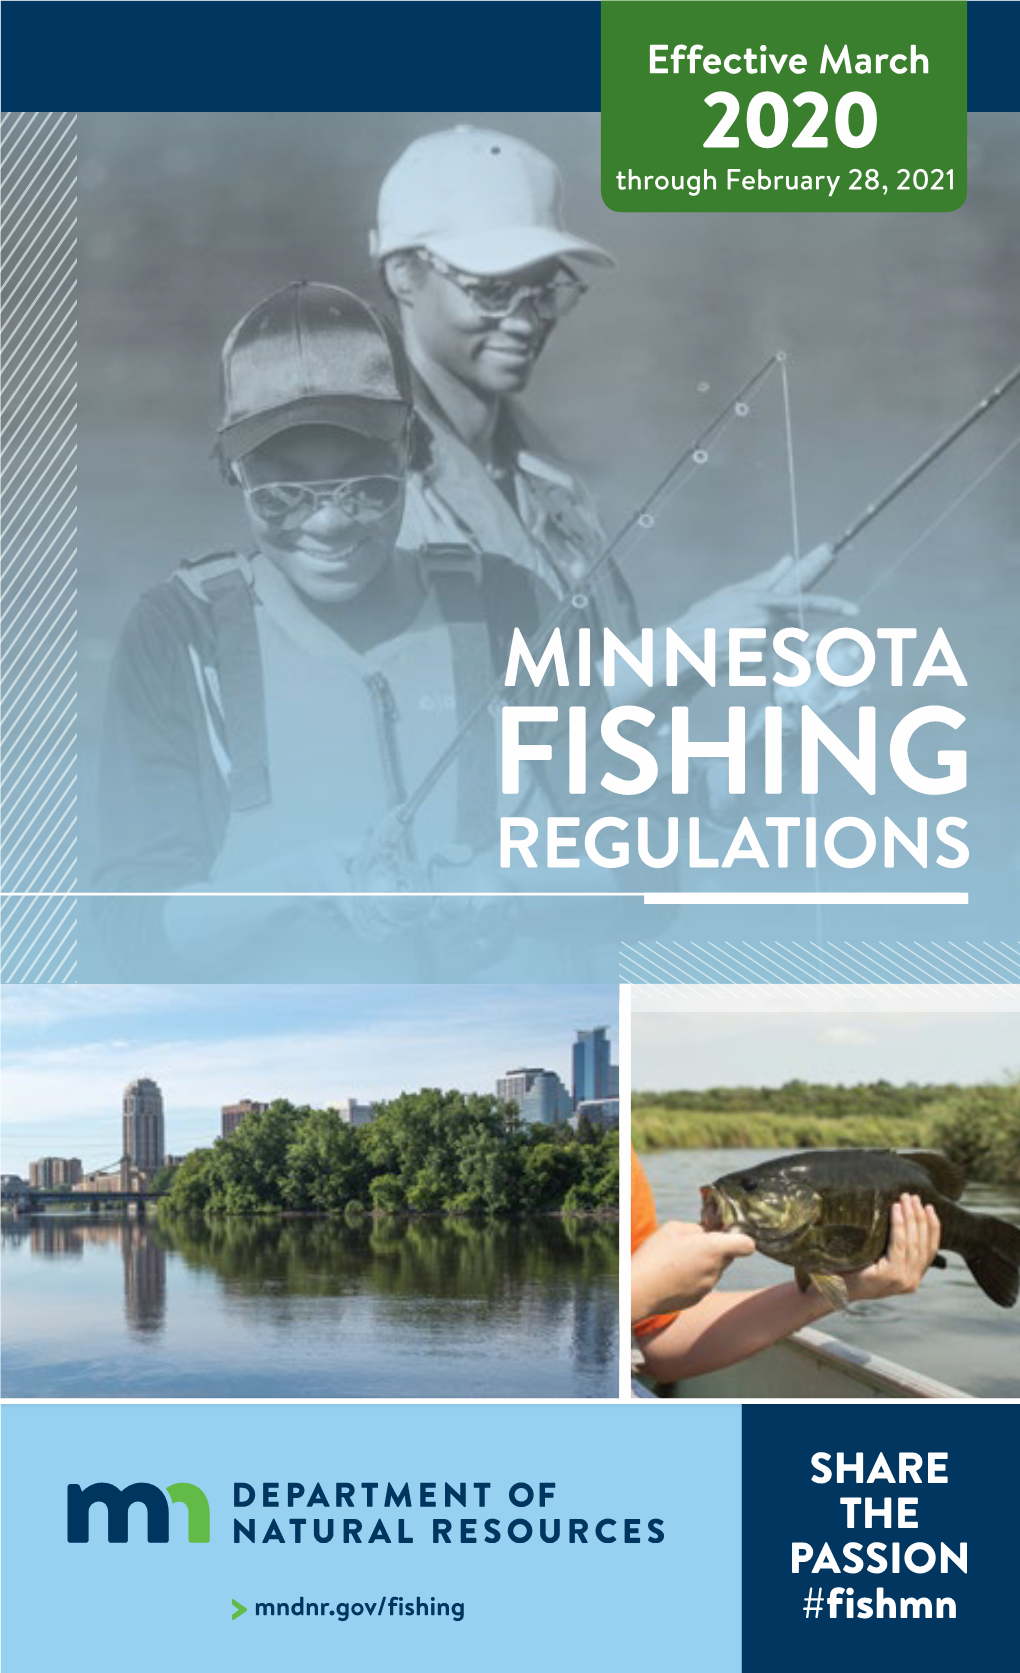 2020 Minnesota Fishing Regulations | 888-MINNDNR START a NEW TRADITION Register As a Donor When You Get Your Minnesota Fishing License Online